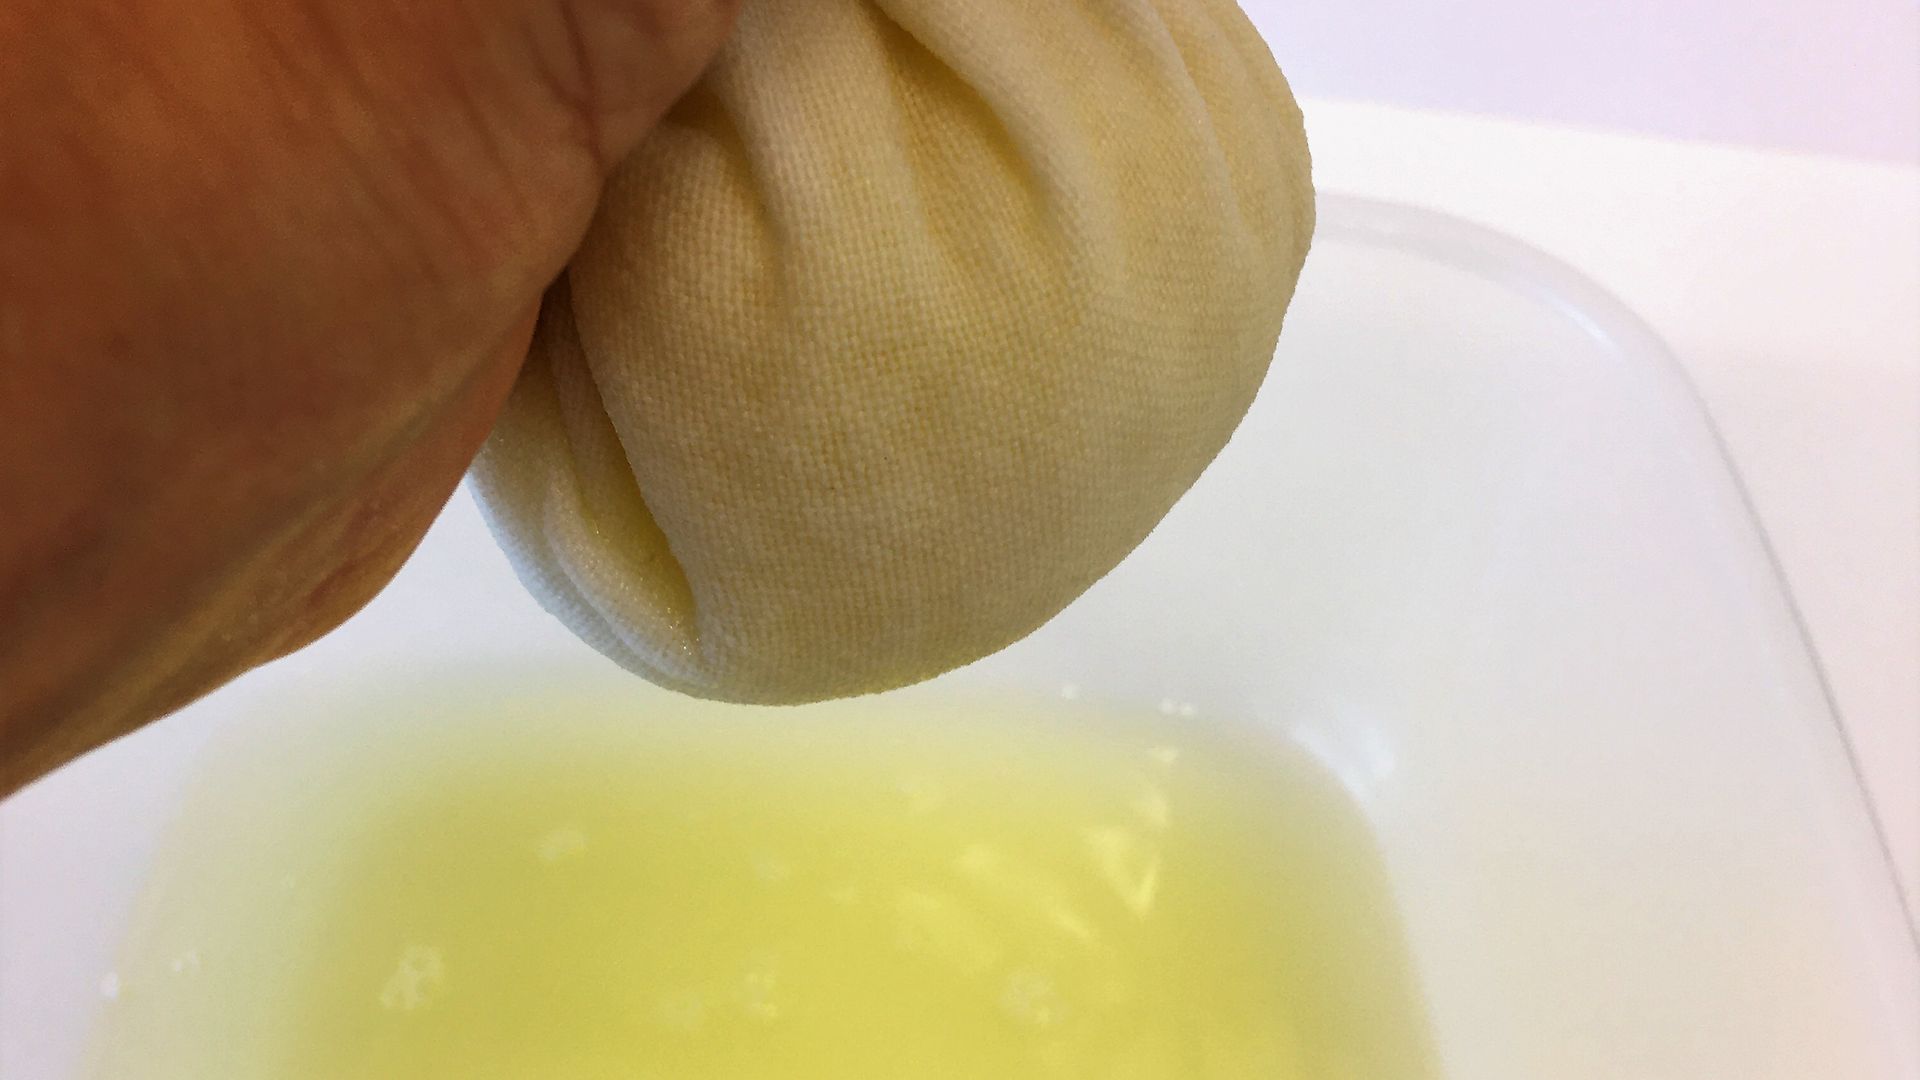 hand squeezing yellow juice from white tea towel ball